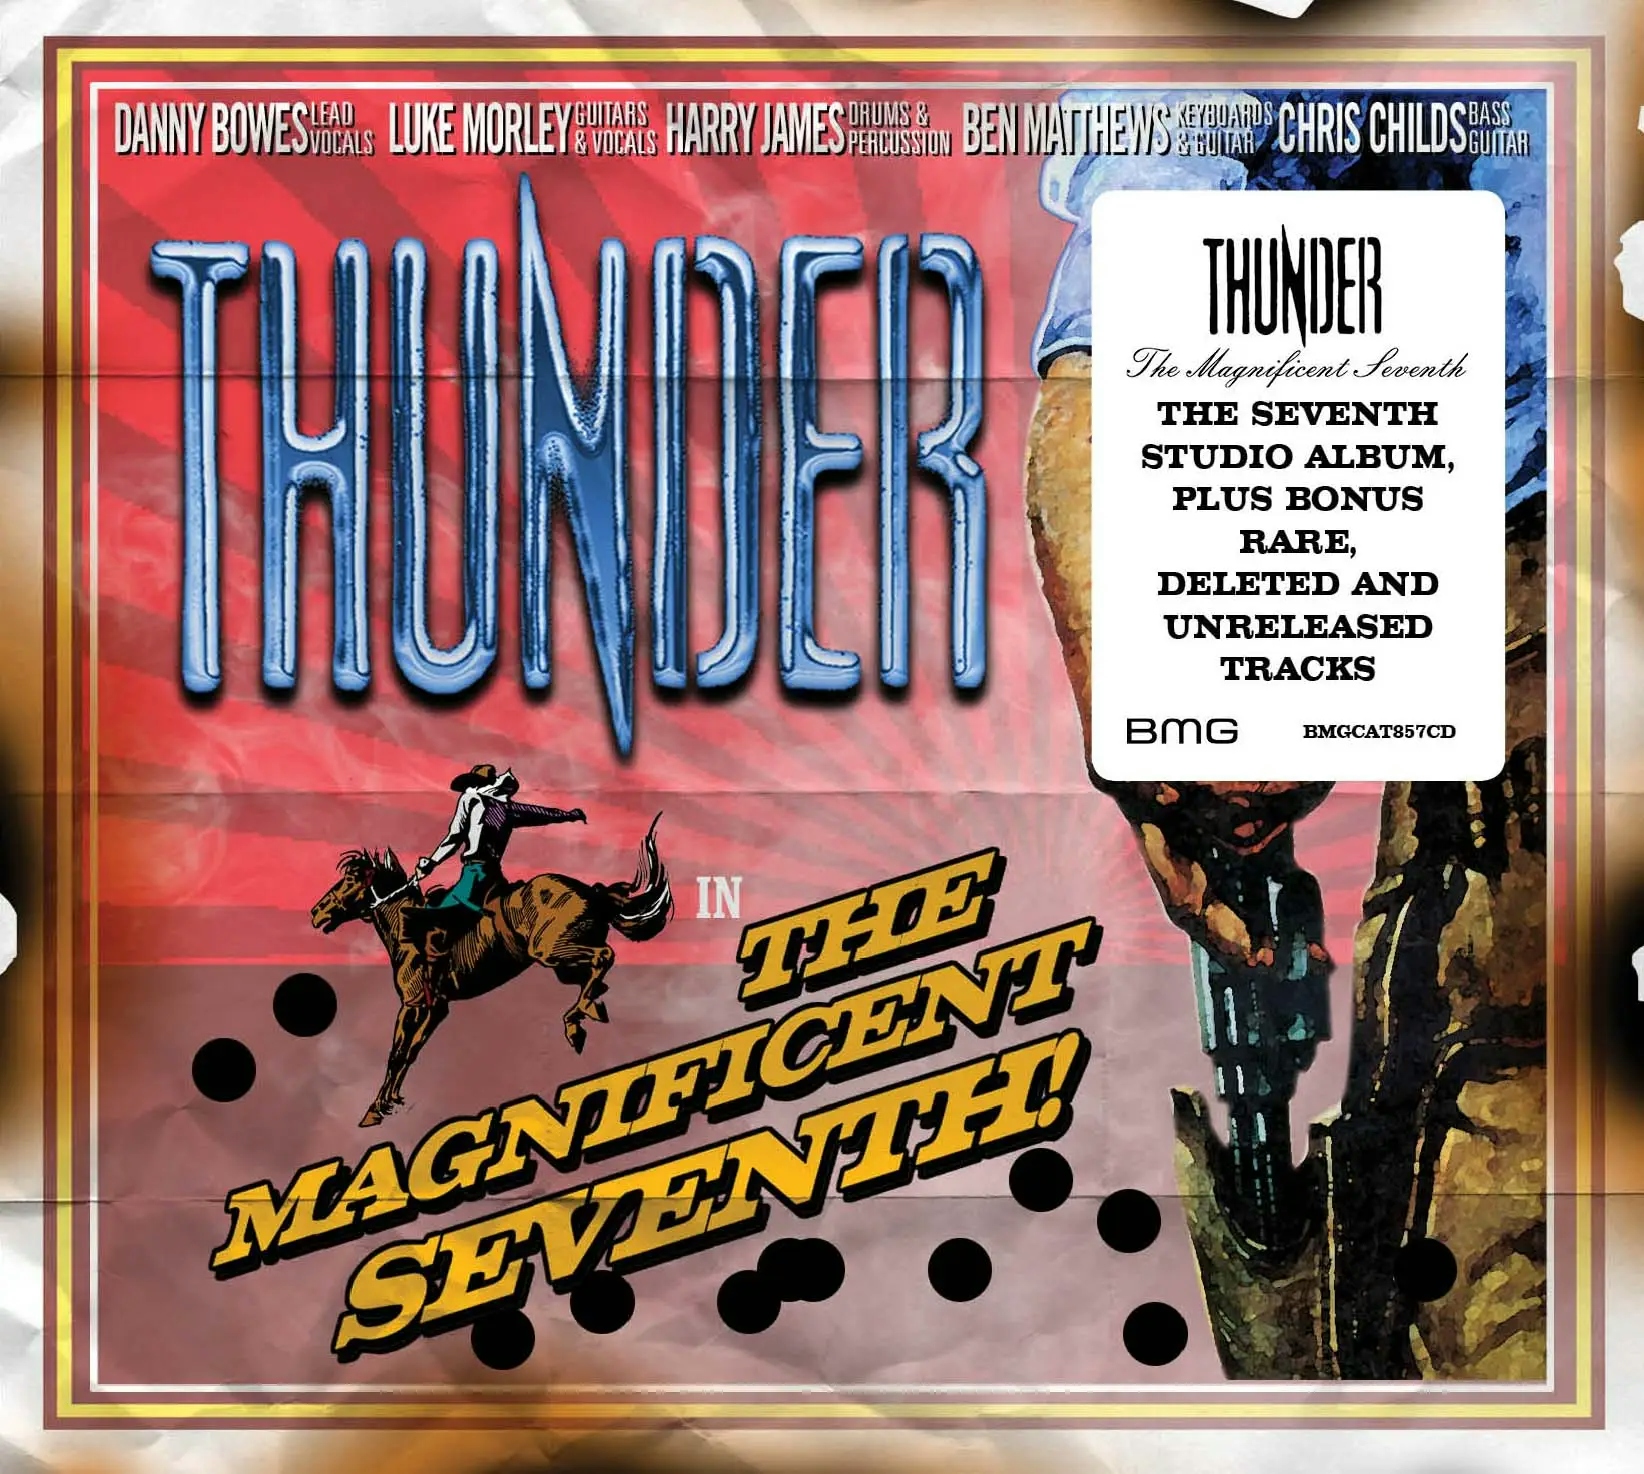 Album artwork for The Magnificent Seventh by Thunder